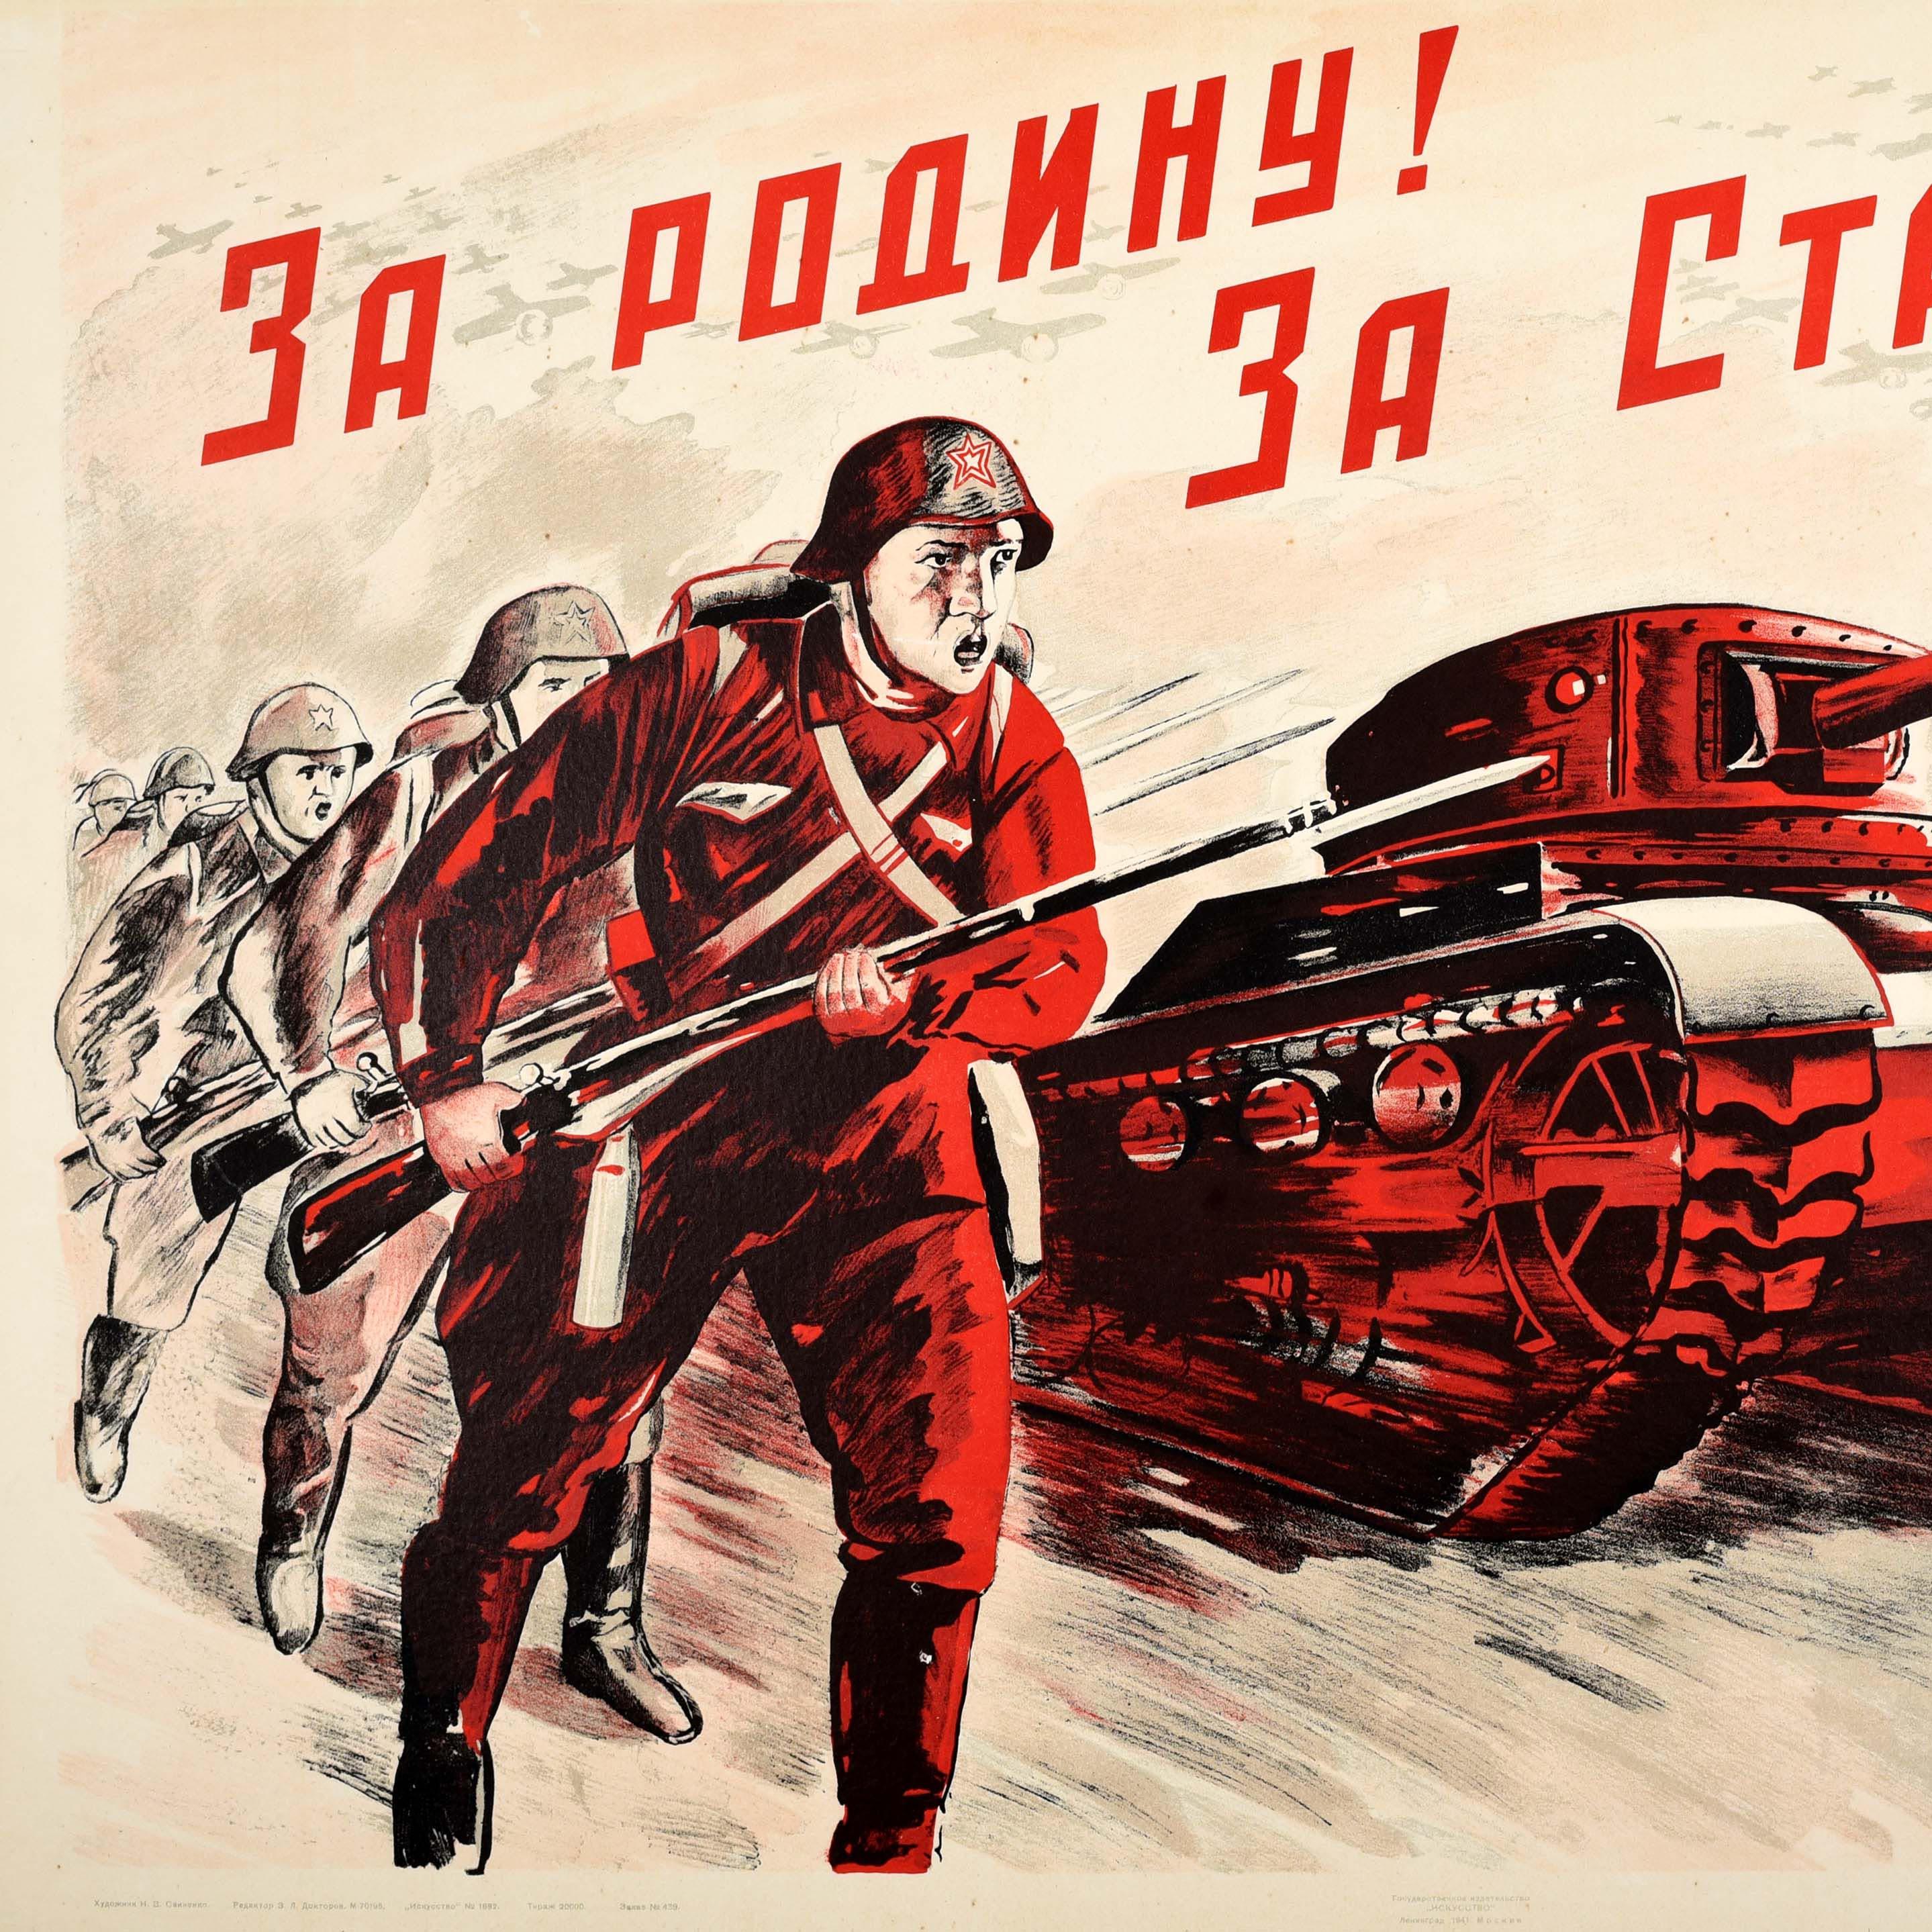 Rare original vintage World War Two Soviet propaganda poster - For the Homeland! For Stalin! / За Родину! За Сталина! - featuring a troop of soldiers carrying bayonet rifle guns charging forward next to a line of military tanks with the bold text